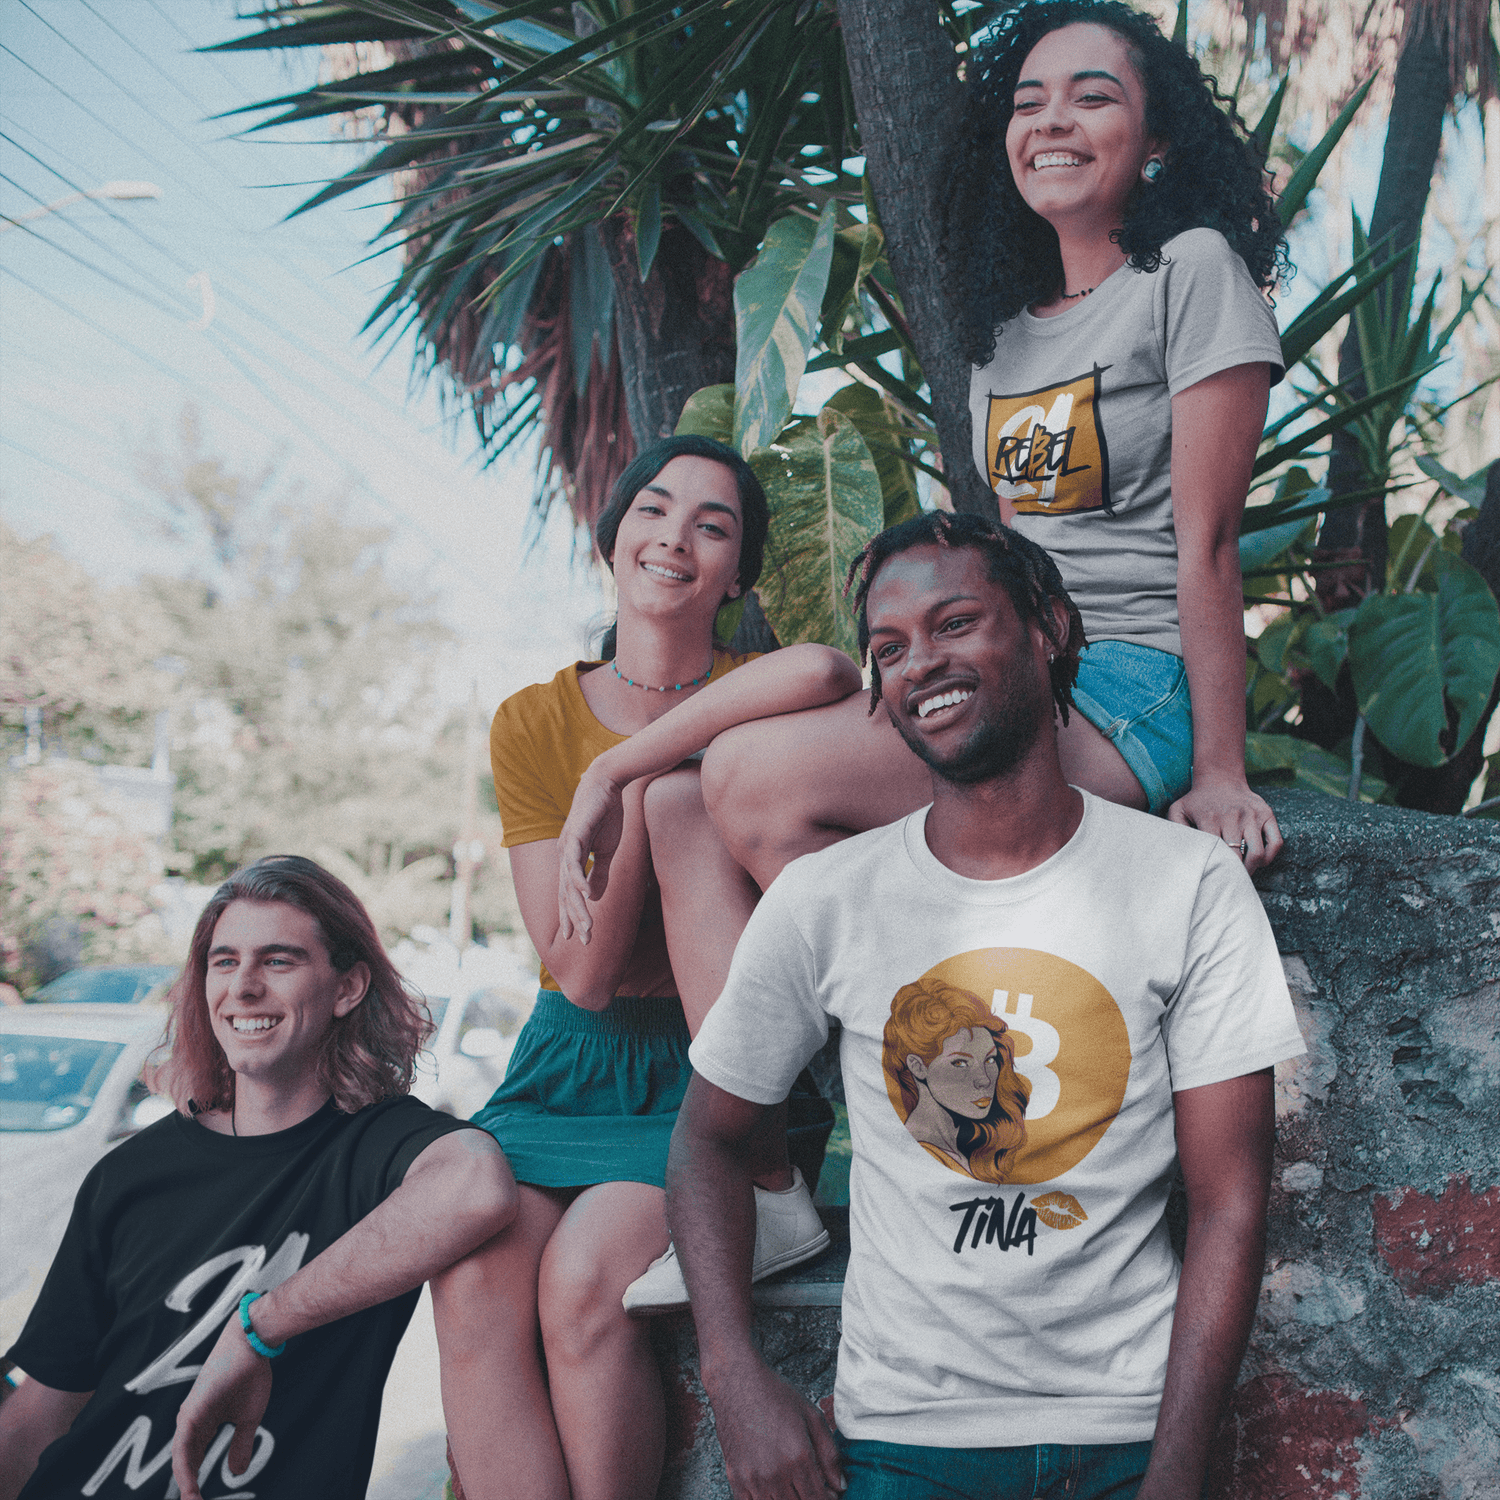 Interracial group of four friedns living the van life wearing bitcoin t-shirts under plants.